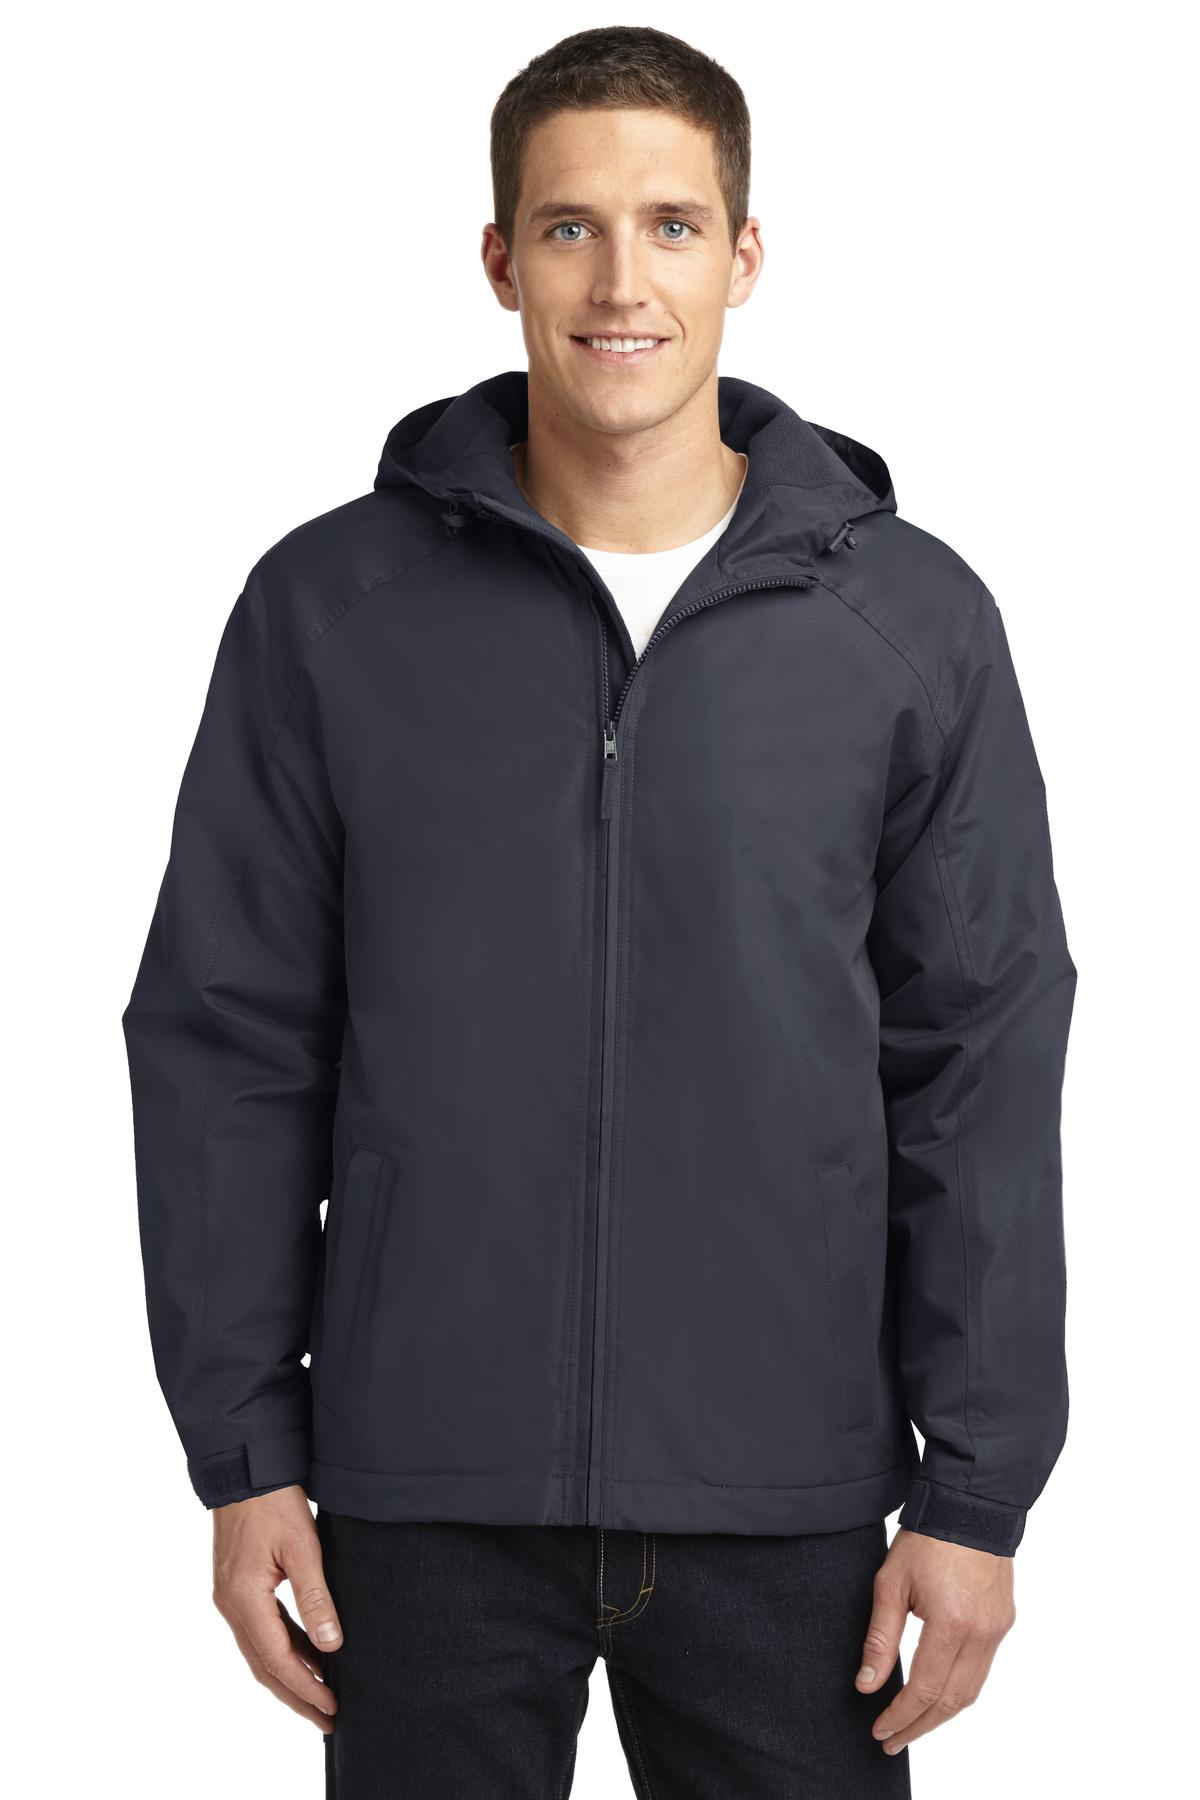 Port Authority Hooded Charger Jacket-Port Authority